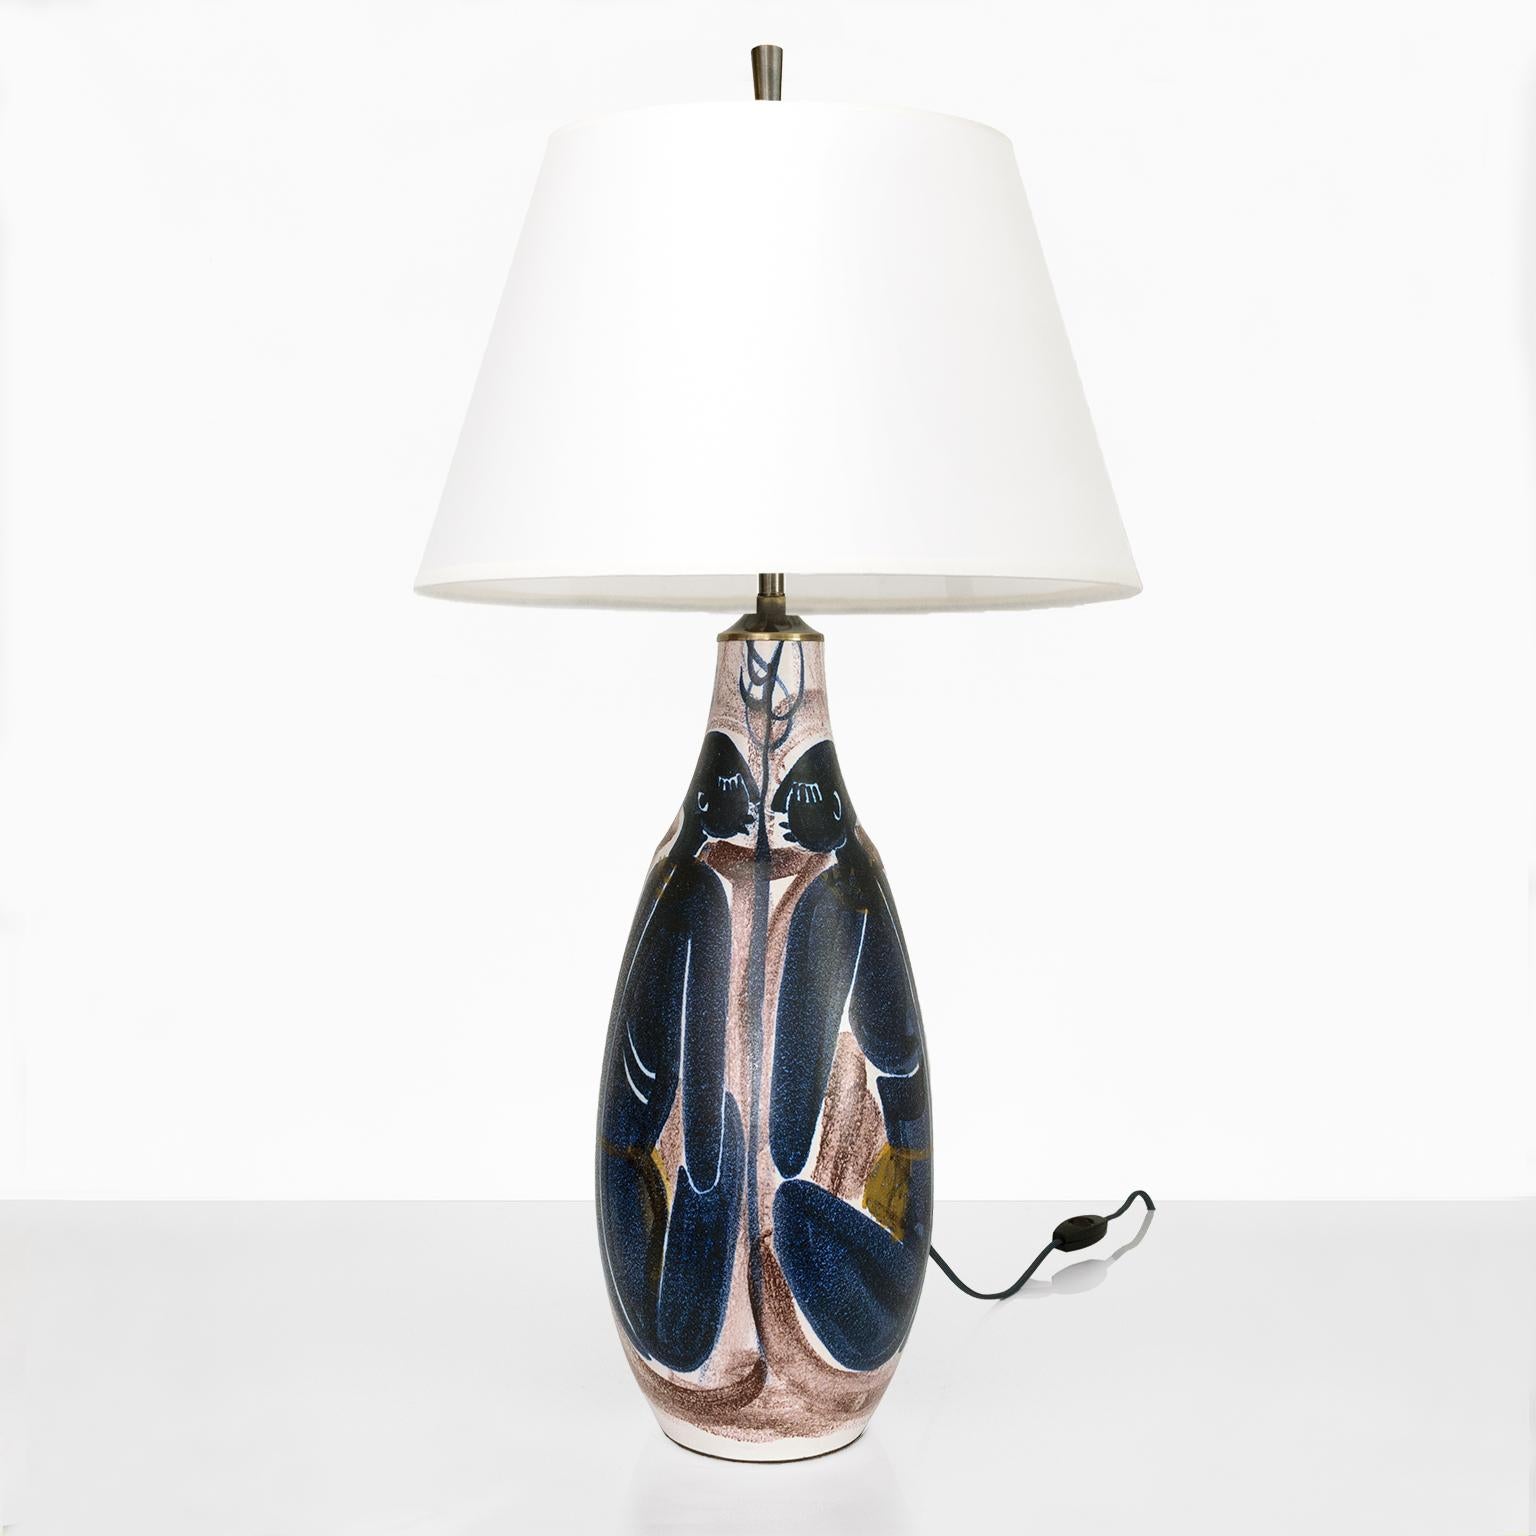 Large Mette Doller hand painted ceramic lamp with 4 seated women in dark blue against a maroon and white background. Newly fitted with custom patinated brass hardware which includes a double cluster of standard base sockets. Shade not included.